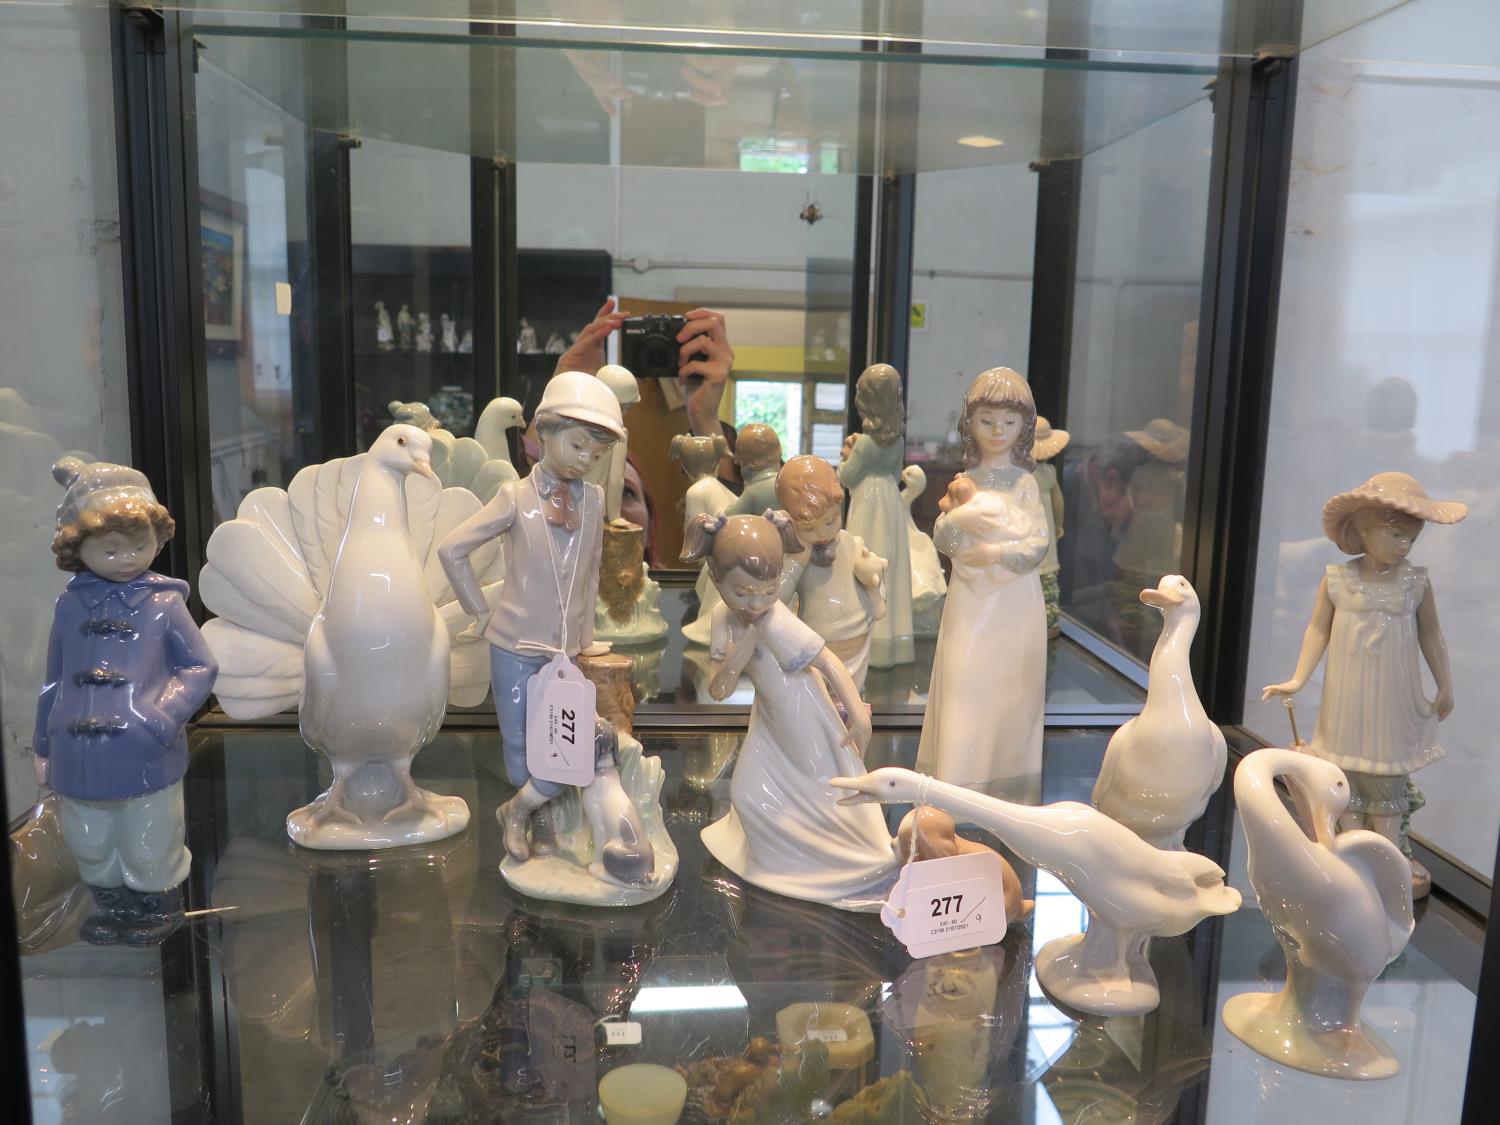 A Lladro figure of a dove, 20 cm high, two Lladro figures of geese, a Nao figure of a goose and